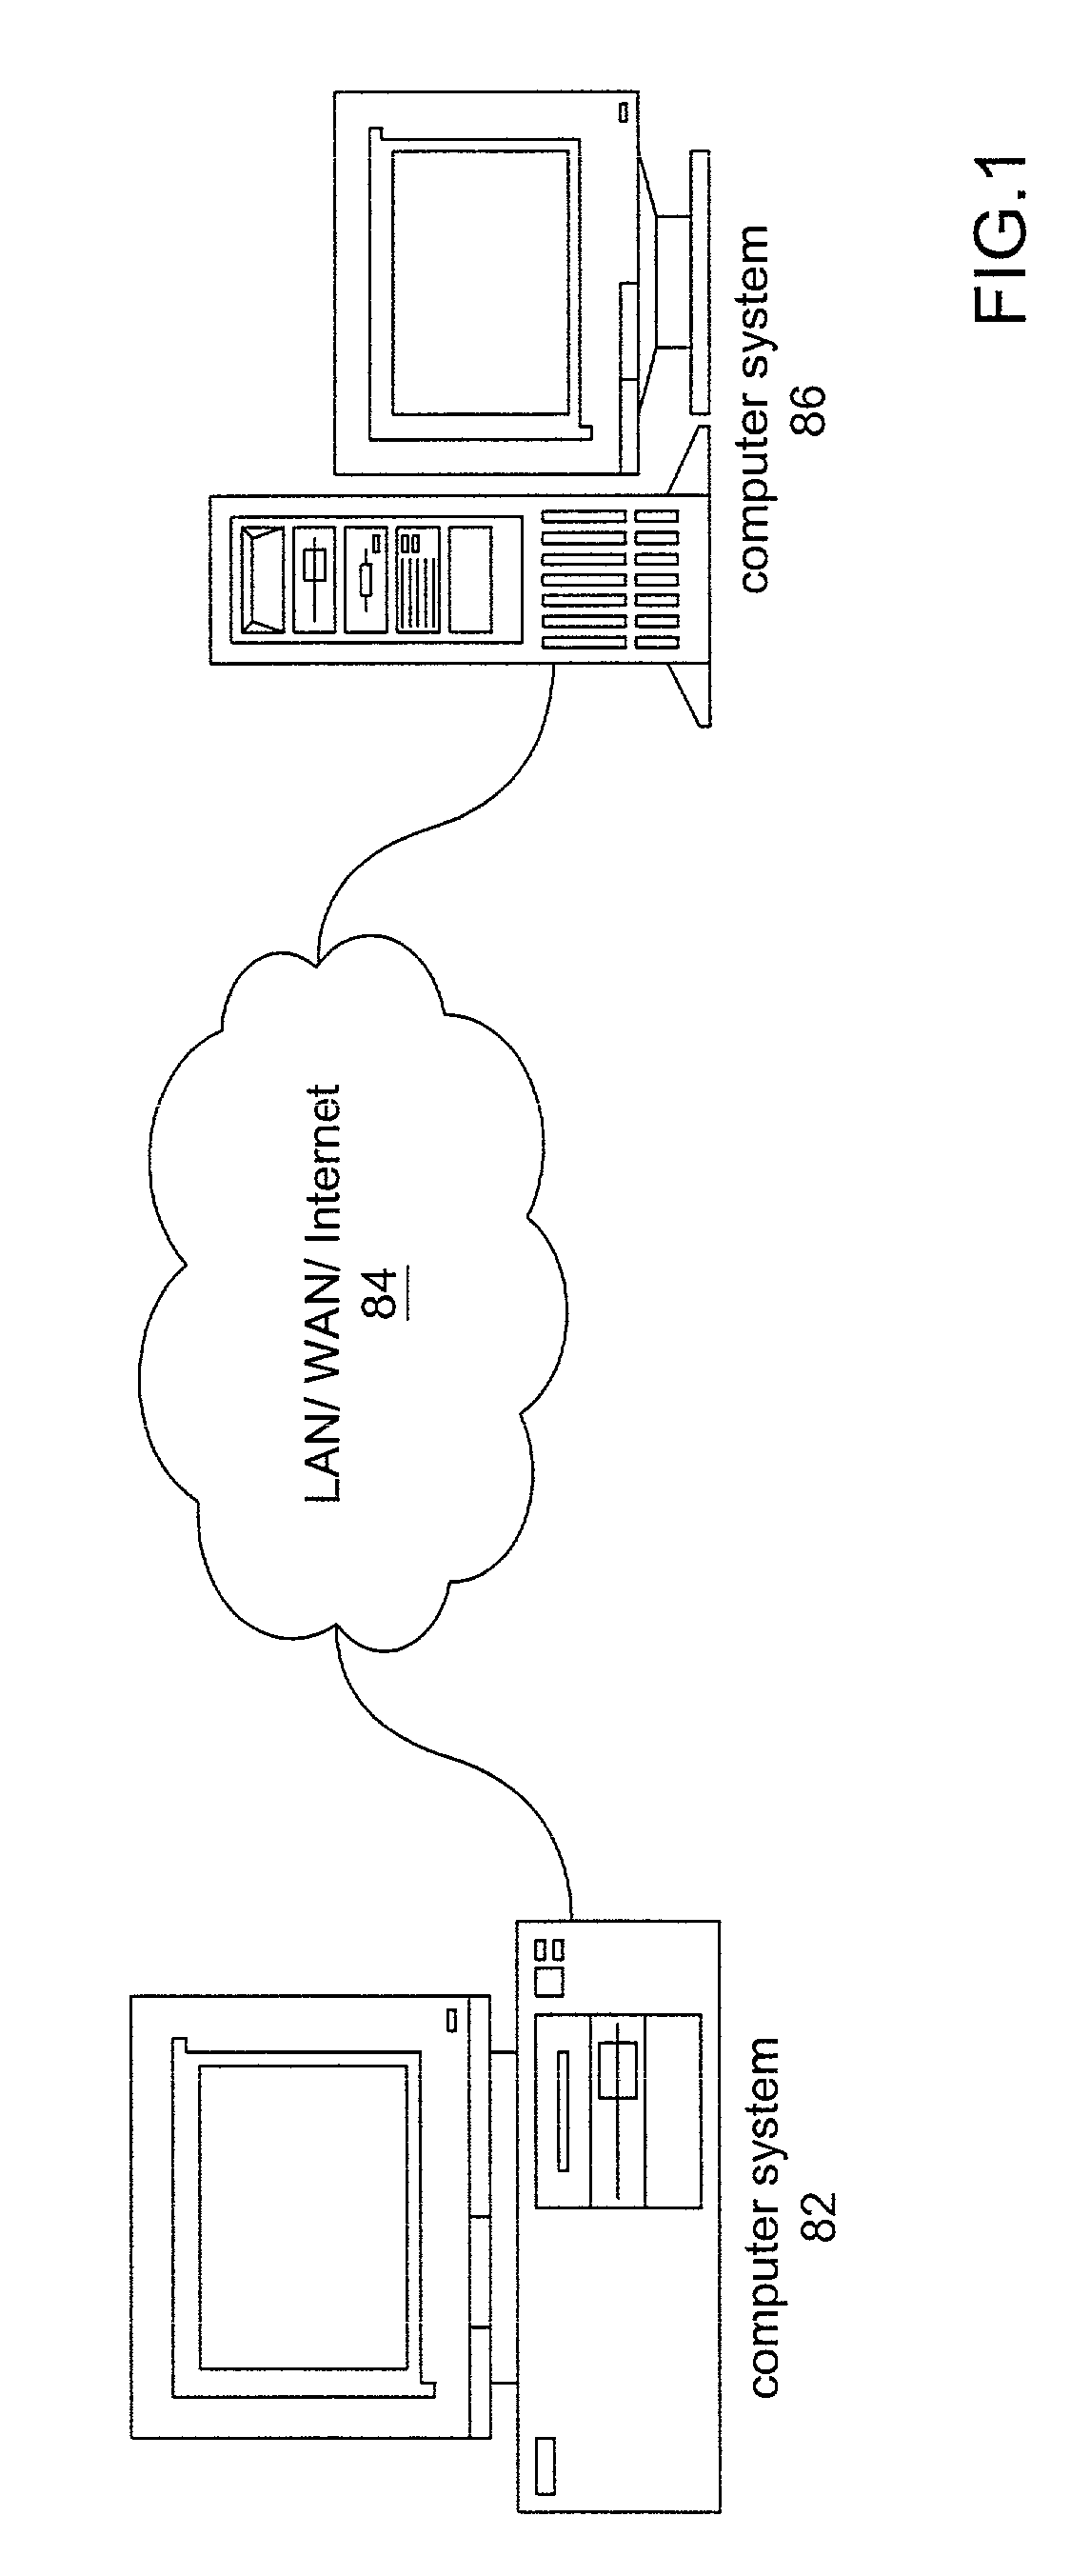 System and method for performing rapid control prototyping using a plurality of graphical programs that share a single graphical user interface